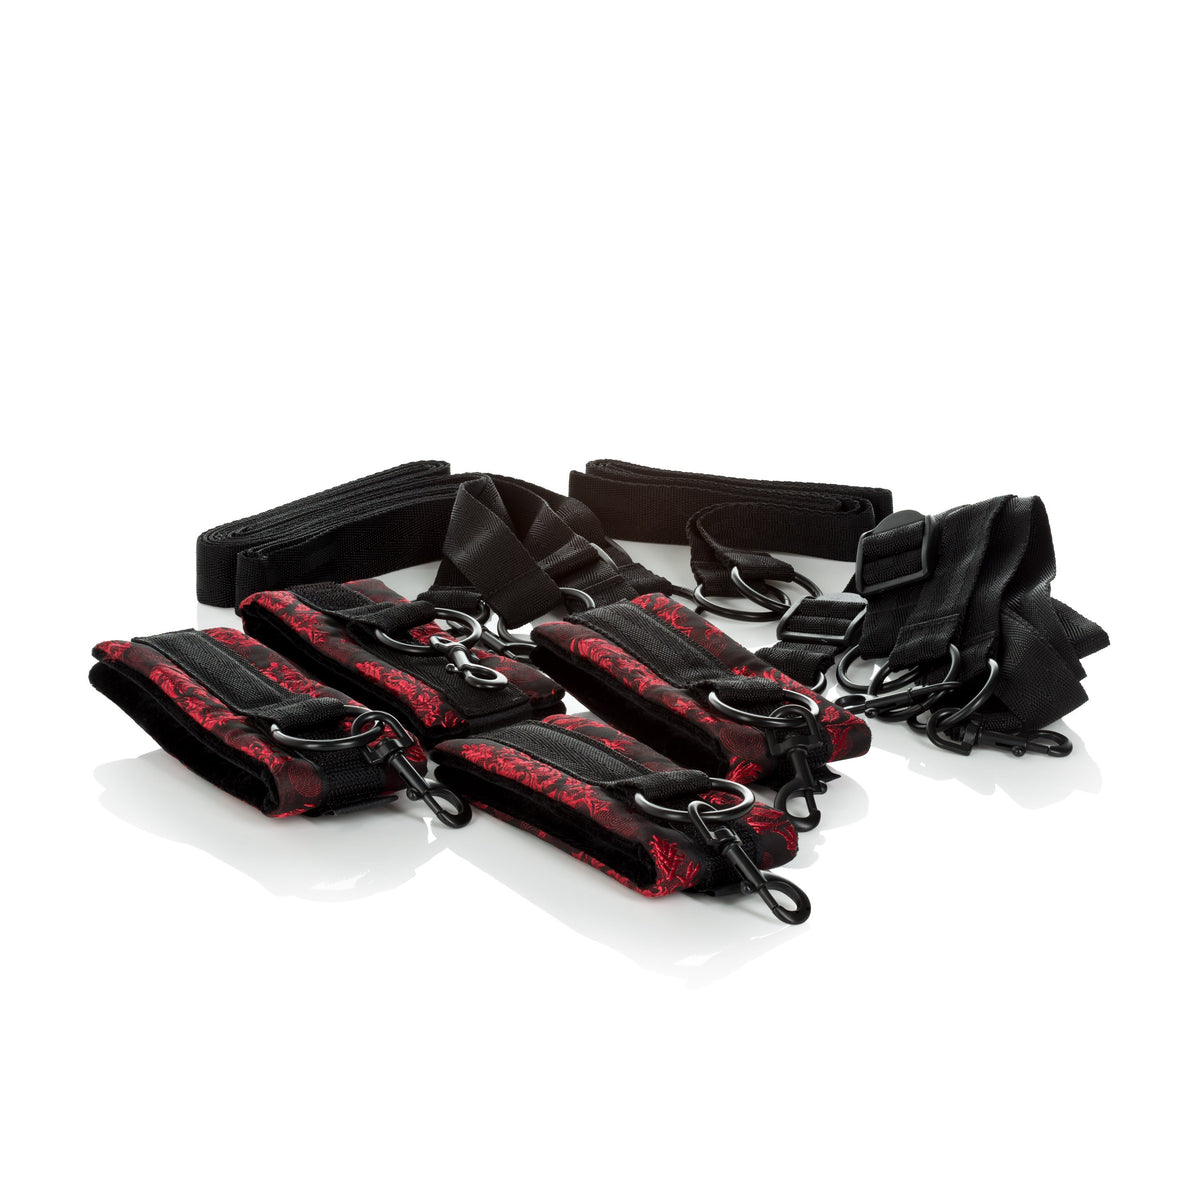 California Exotics - Scandal Bed Restraints (Red) CE1588 CherryAffairs